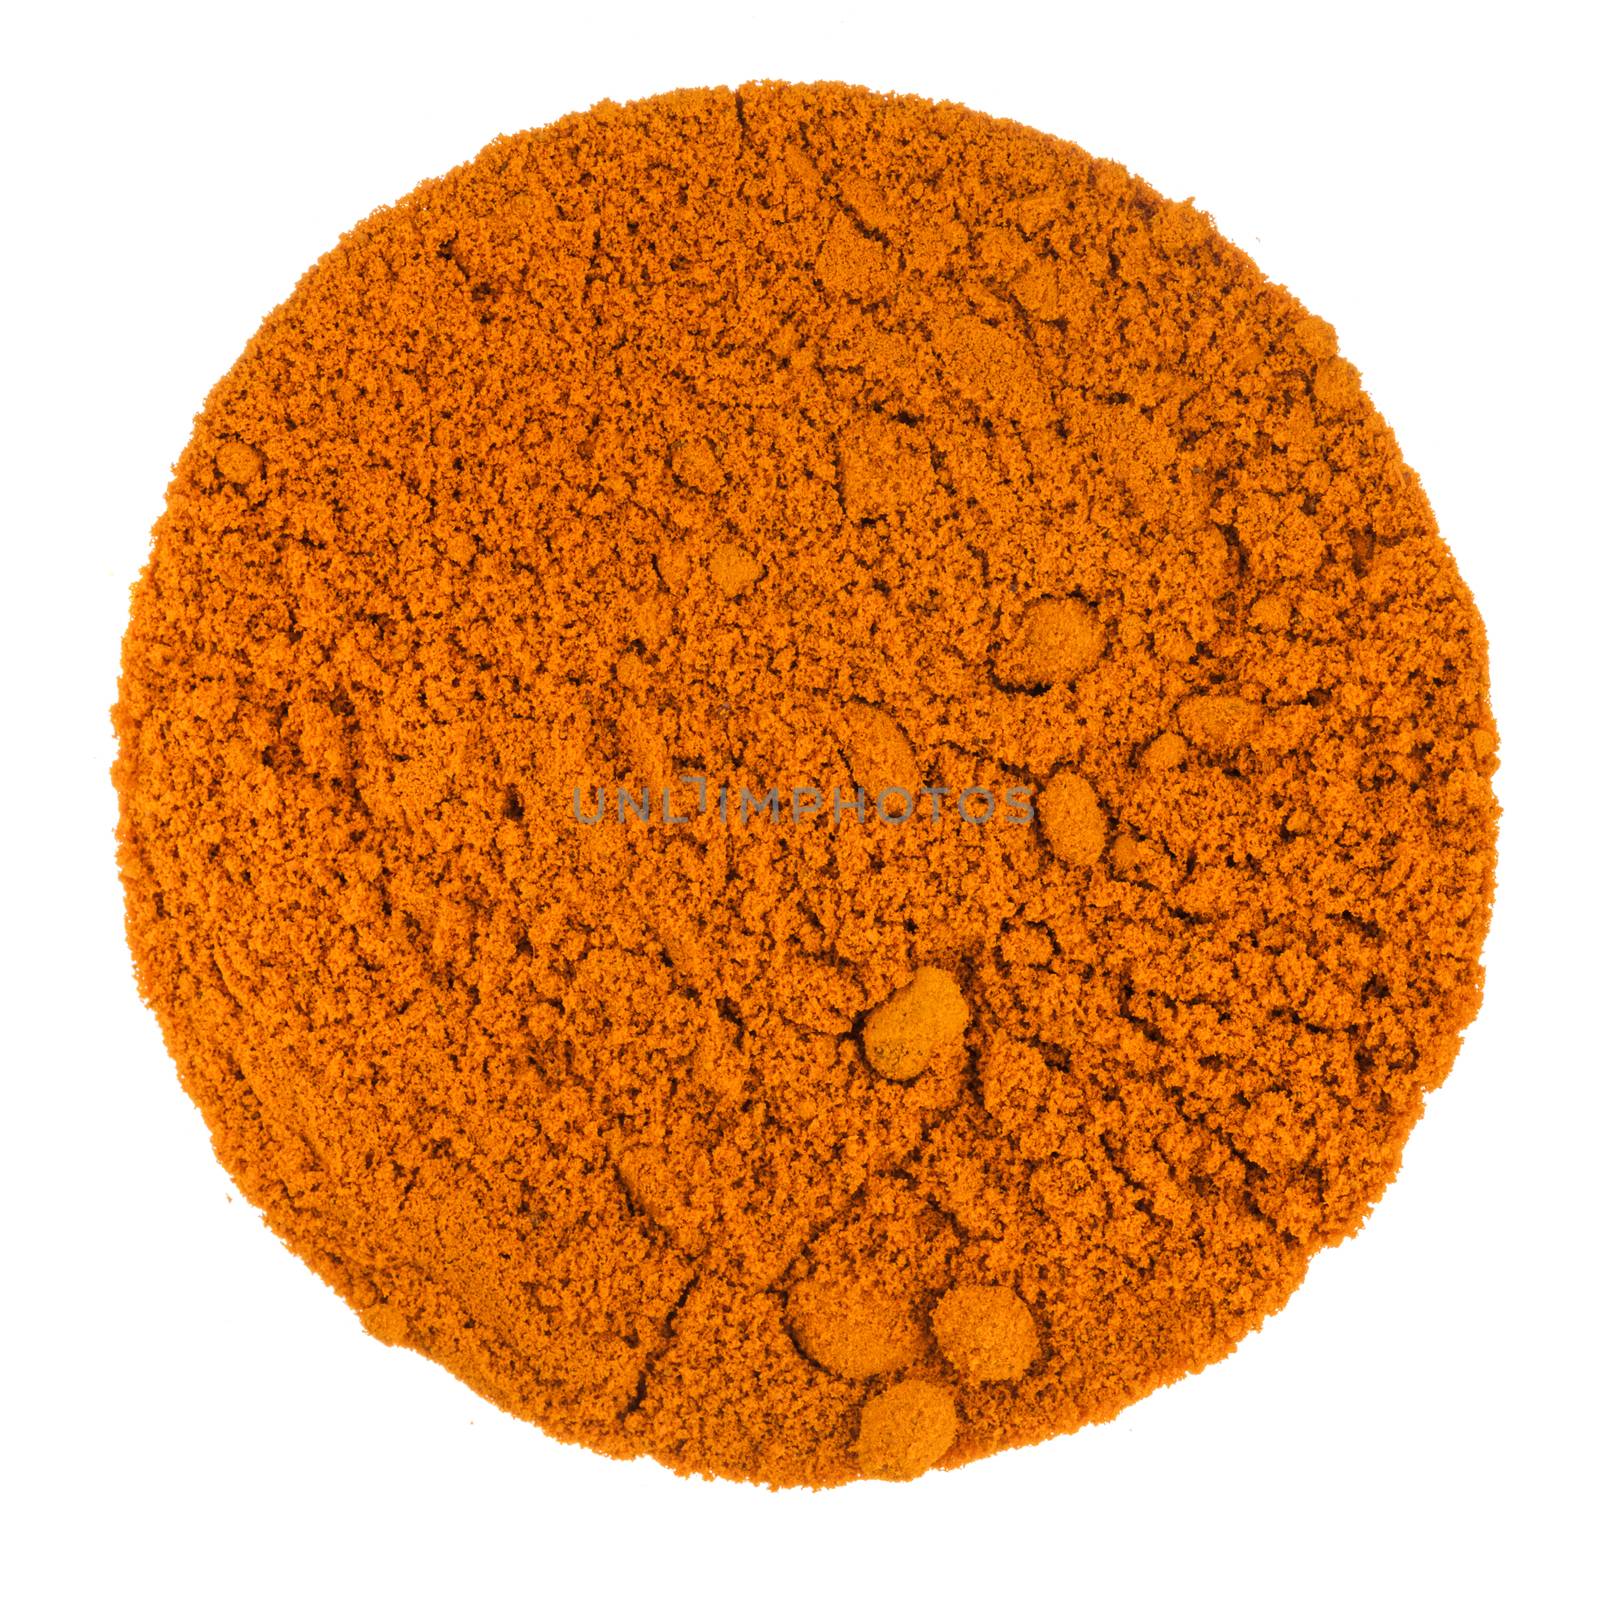 Turmeric Powder Macro Texture on aPerfect Circle Isolated on White Background